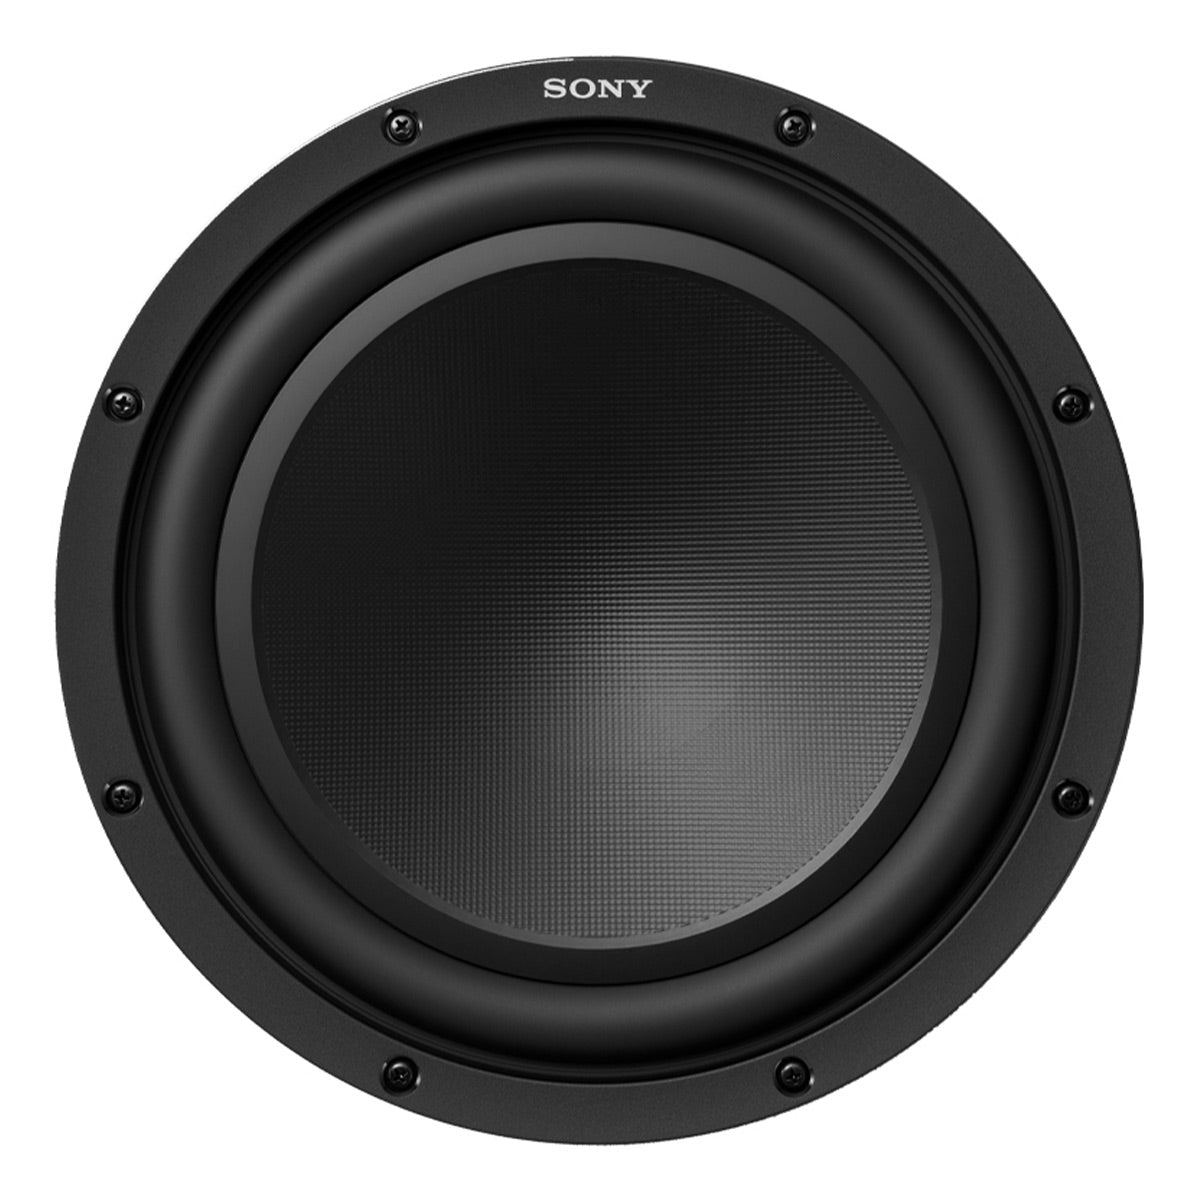 Photos - Car Speakers Sony Mobile XS-W124GS 12" Subwoofer Black XSW124GS 